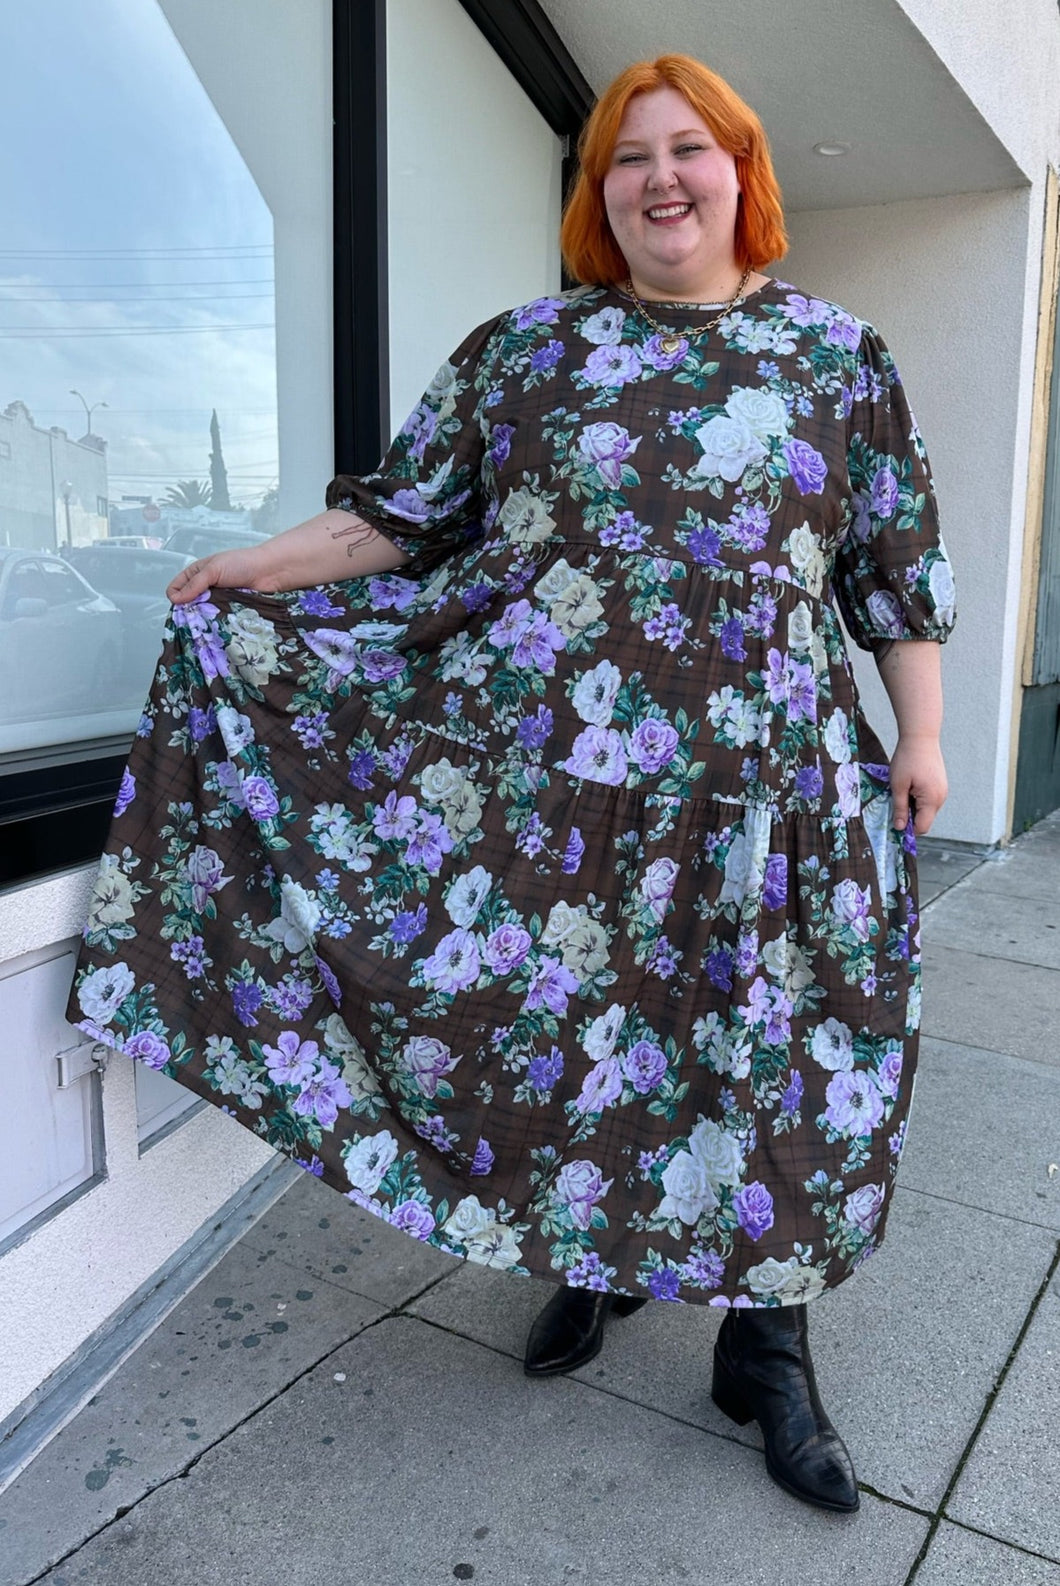 Full-body front view of a size 26 ASOS dark olive green, vibrant green, and lavender mixed print floral and plaid tiered maxi dress with puff sleeves styled with black boots on a size 22/24 model. The photo is taken outside in natural lighting.